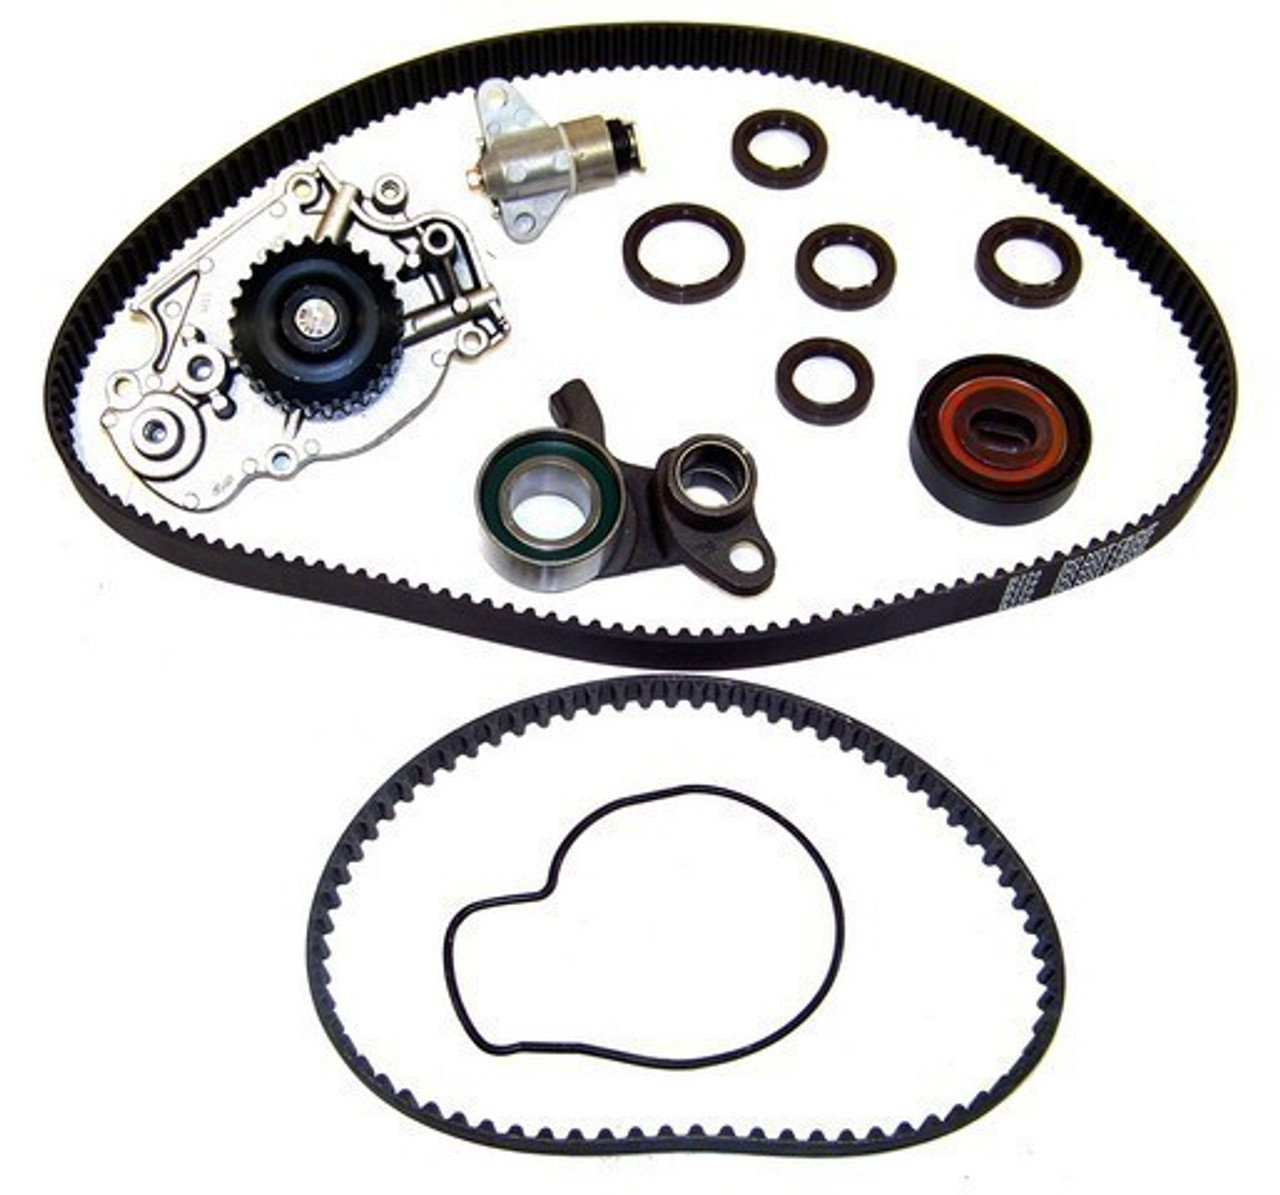 1996 Honda Prelude 2.2L Engine Timing Belt Kit with Water Pump TBK223WP -4